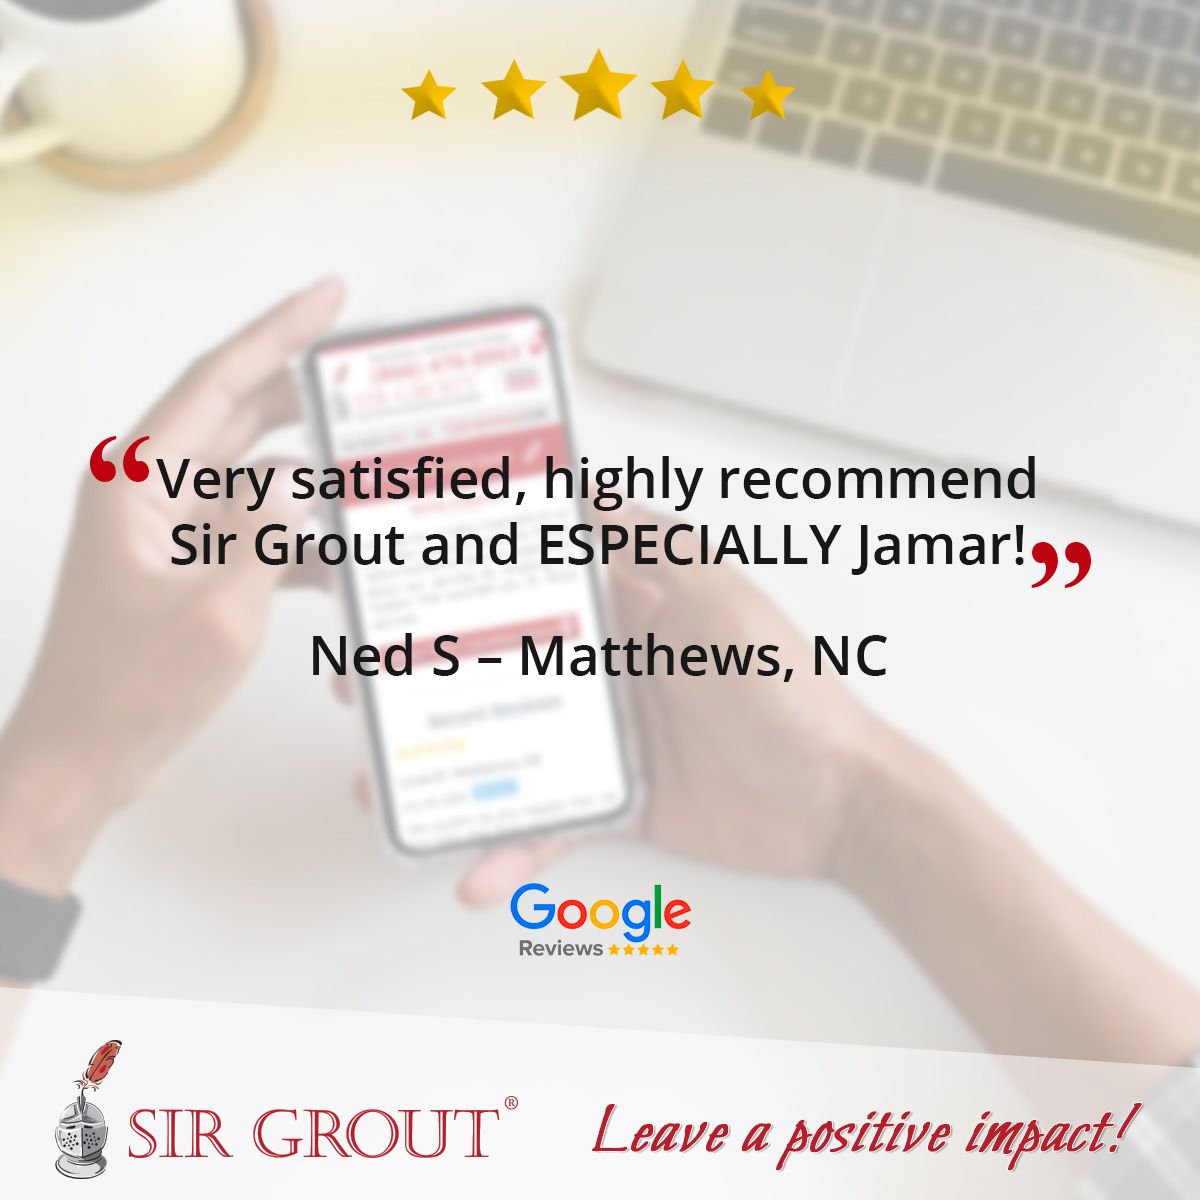 Very satisfied, highly recommend Sir Grout and ESPECIALLY Jamar!